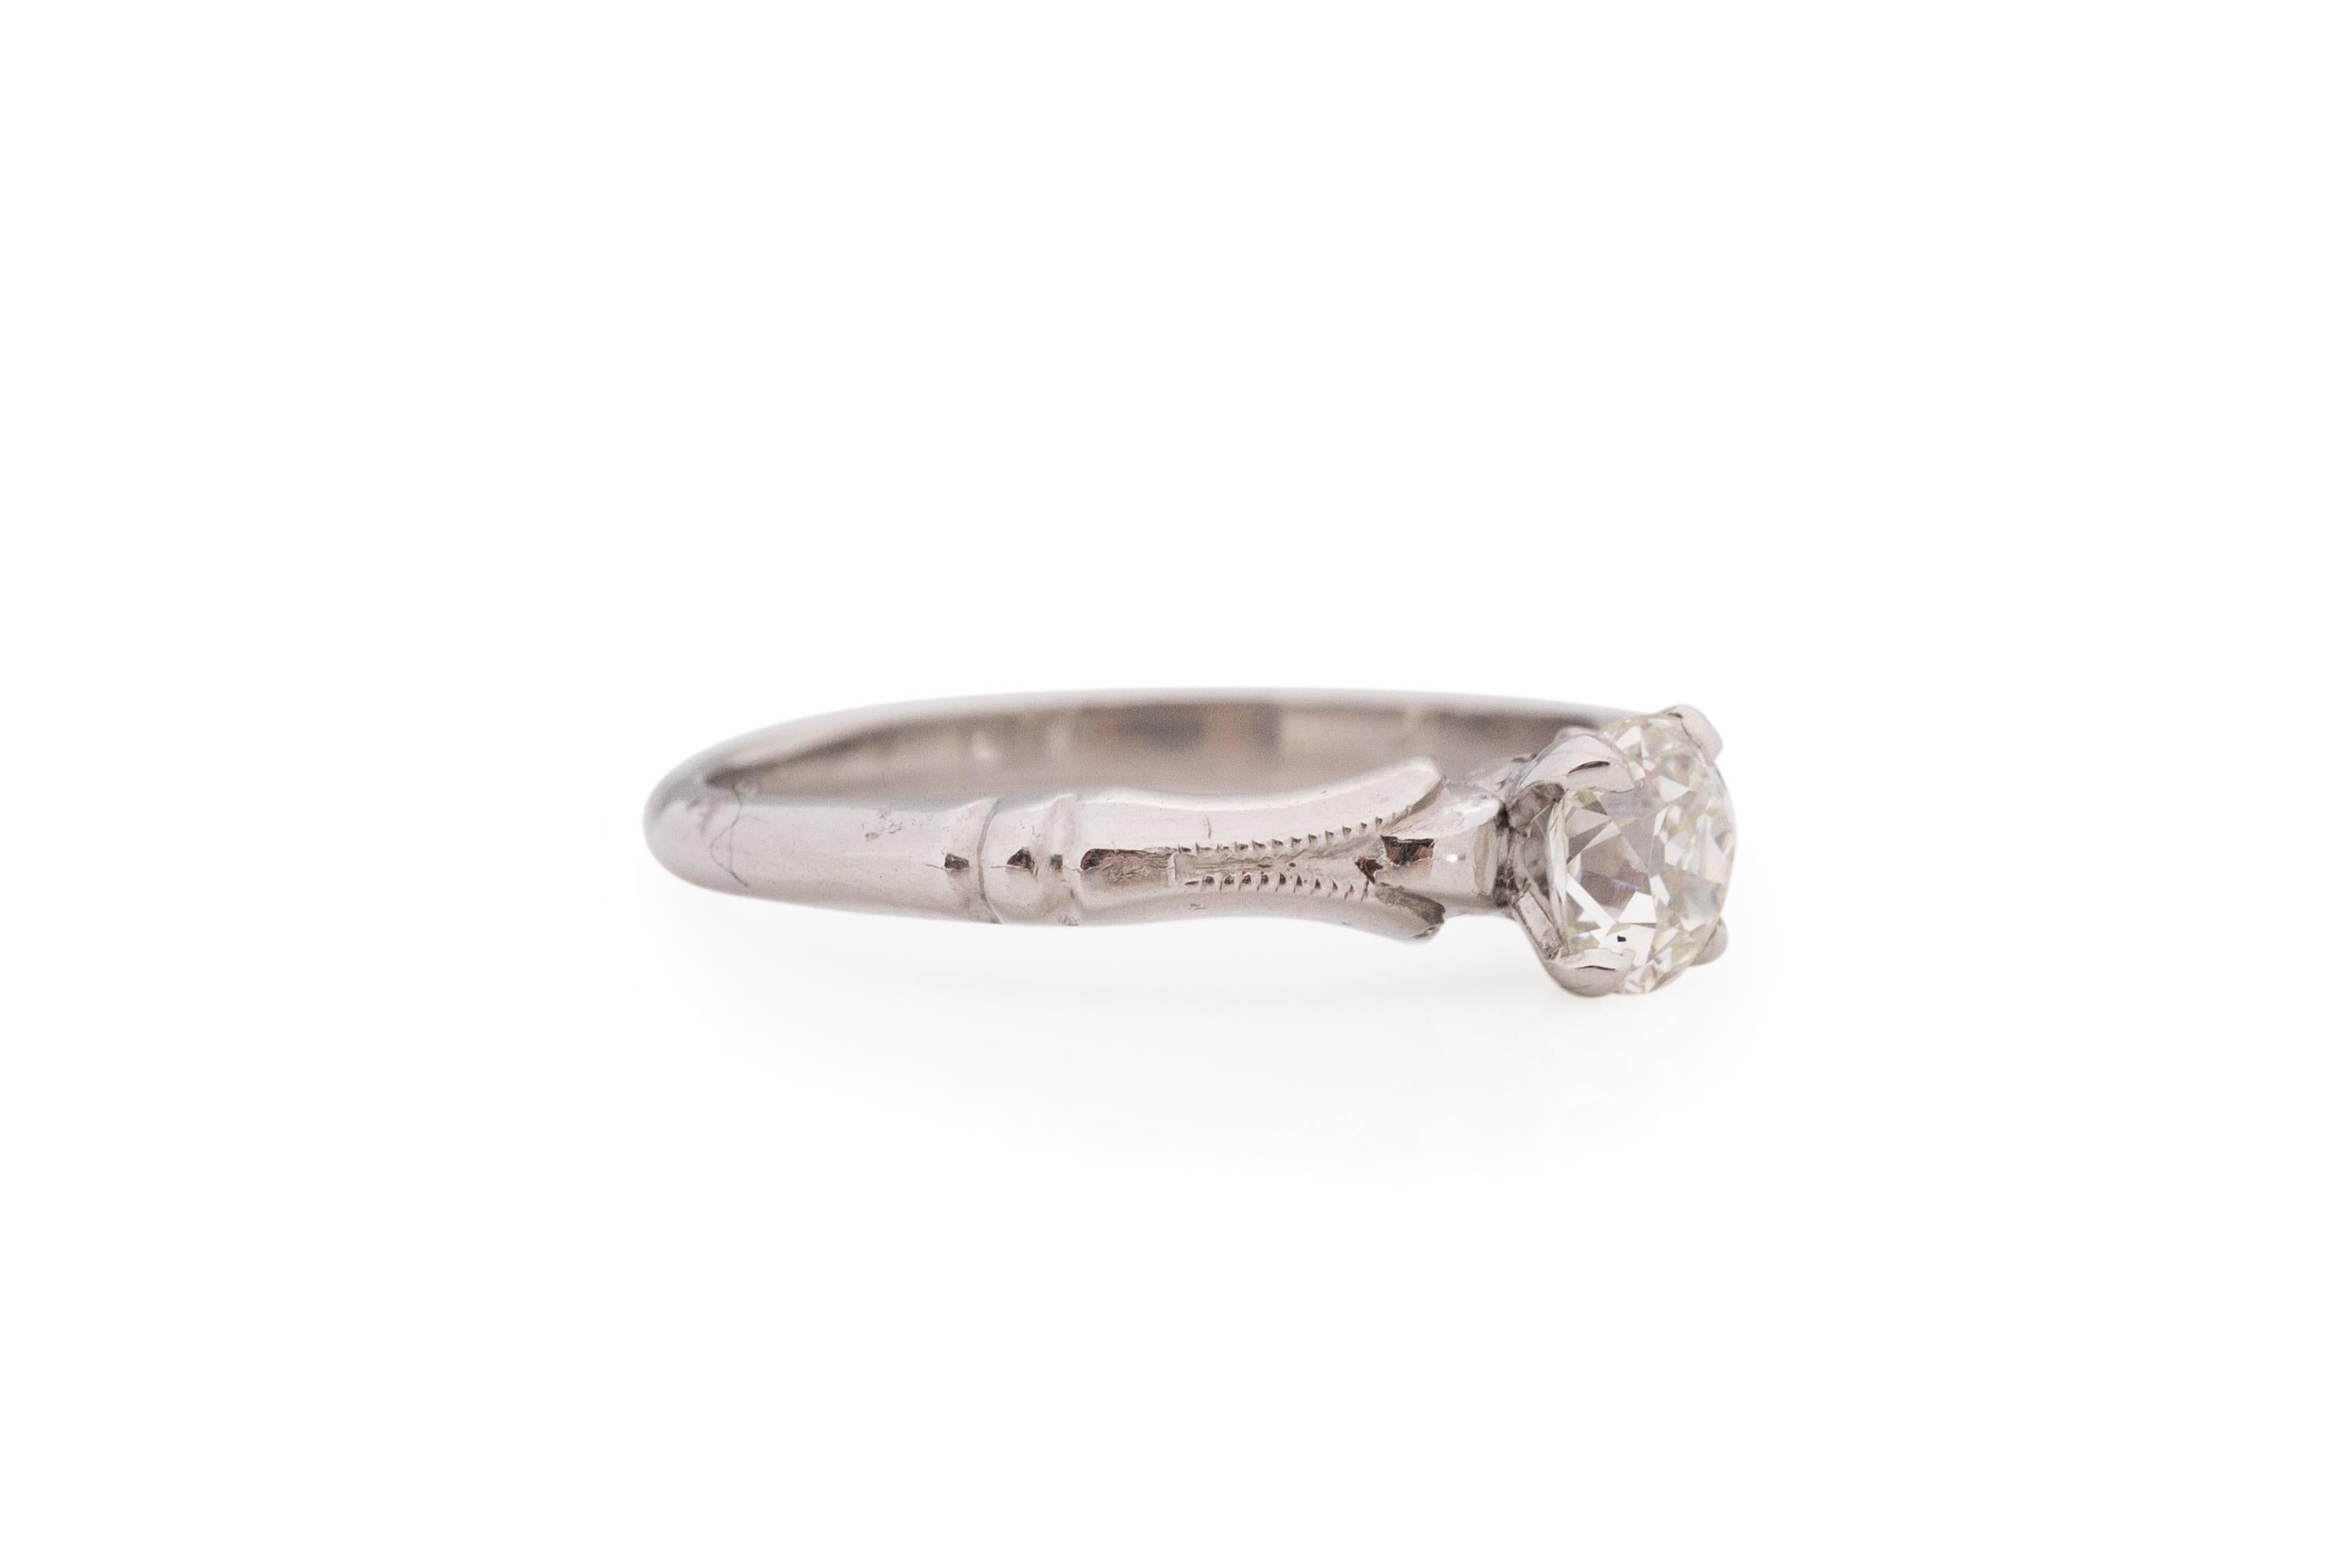 Ring Size: 6.25
Metal Type: Palladium [Hallmarked, and Tested]
Weight: 3.0 grams

Center Diamond Details:
GIA REPORT #: 6213579931
Weight: .55 carat
Cut: Antique Cushion
Color: L
Clarity: VVS2
Measurements: 5.15mm x 4.37 x 3.17

Finger to Top of